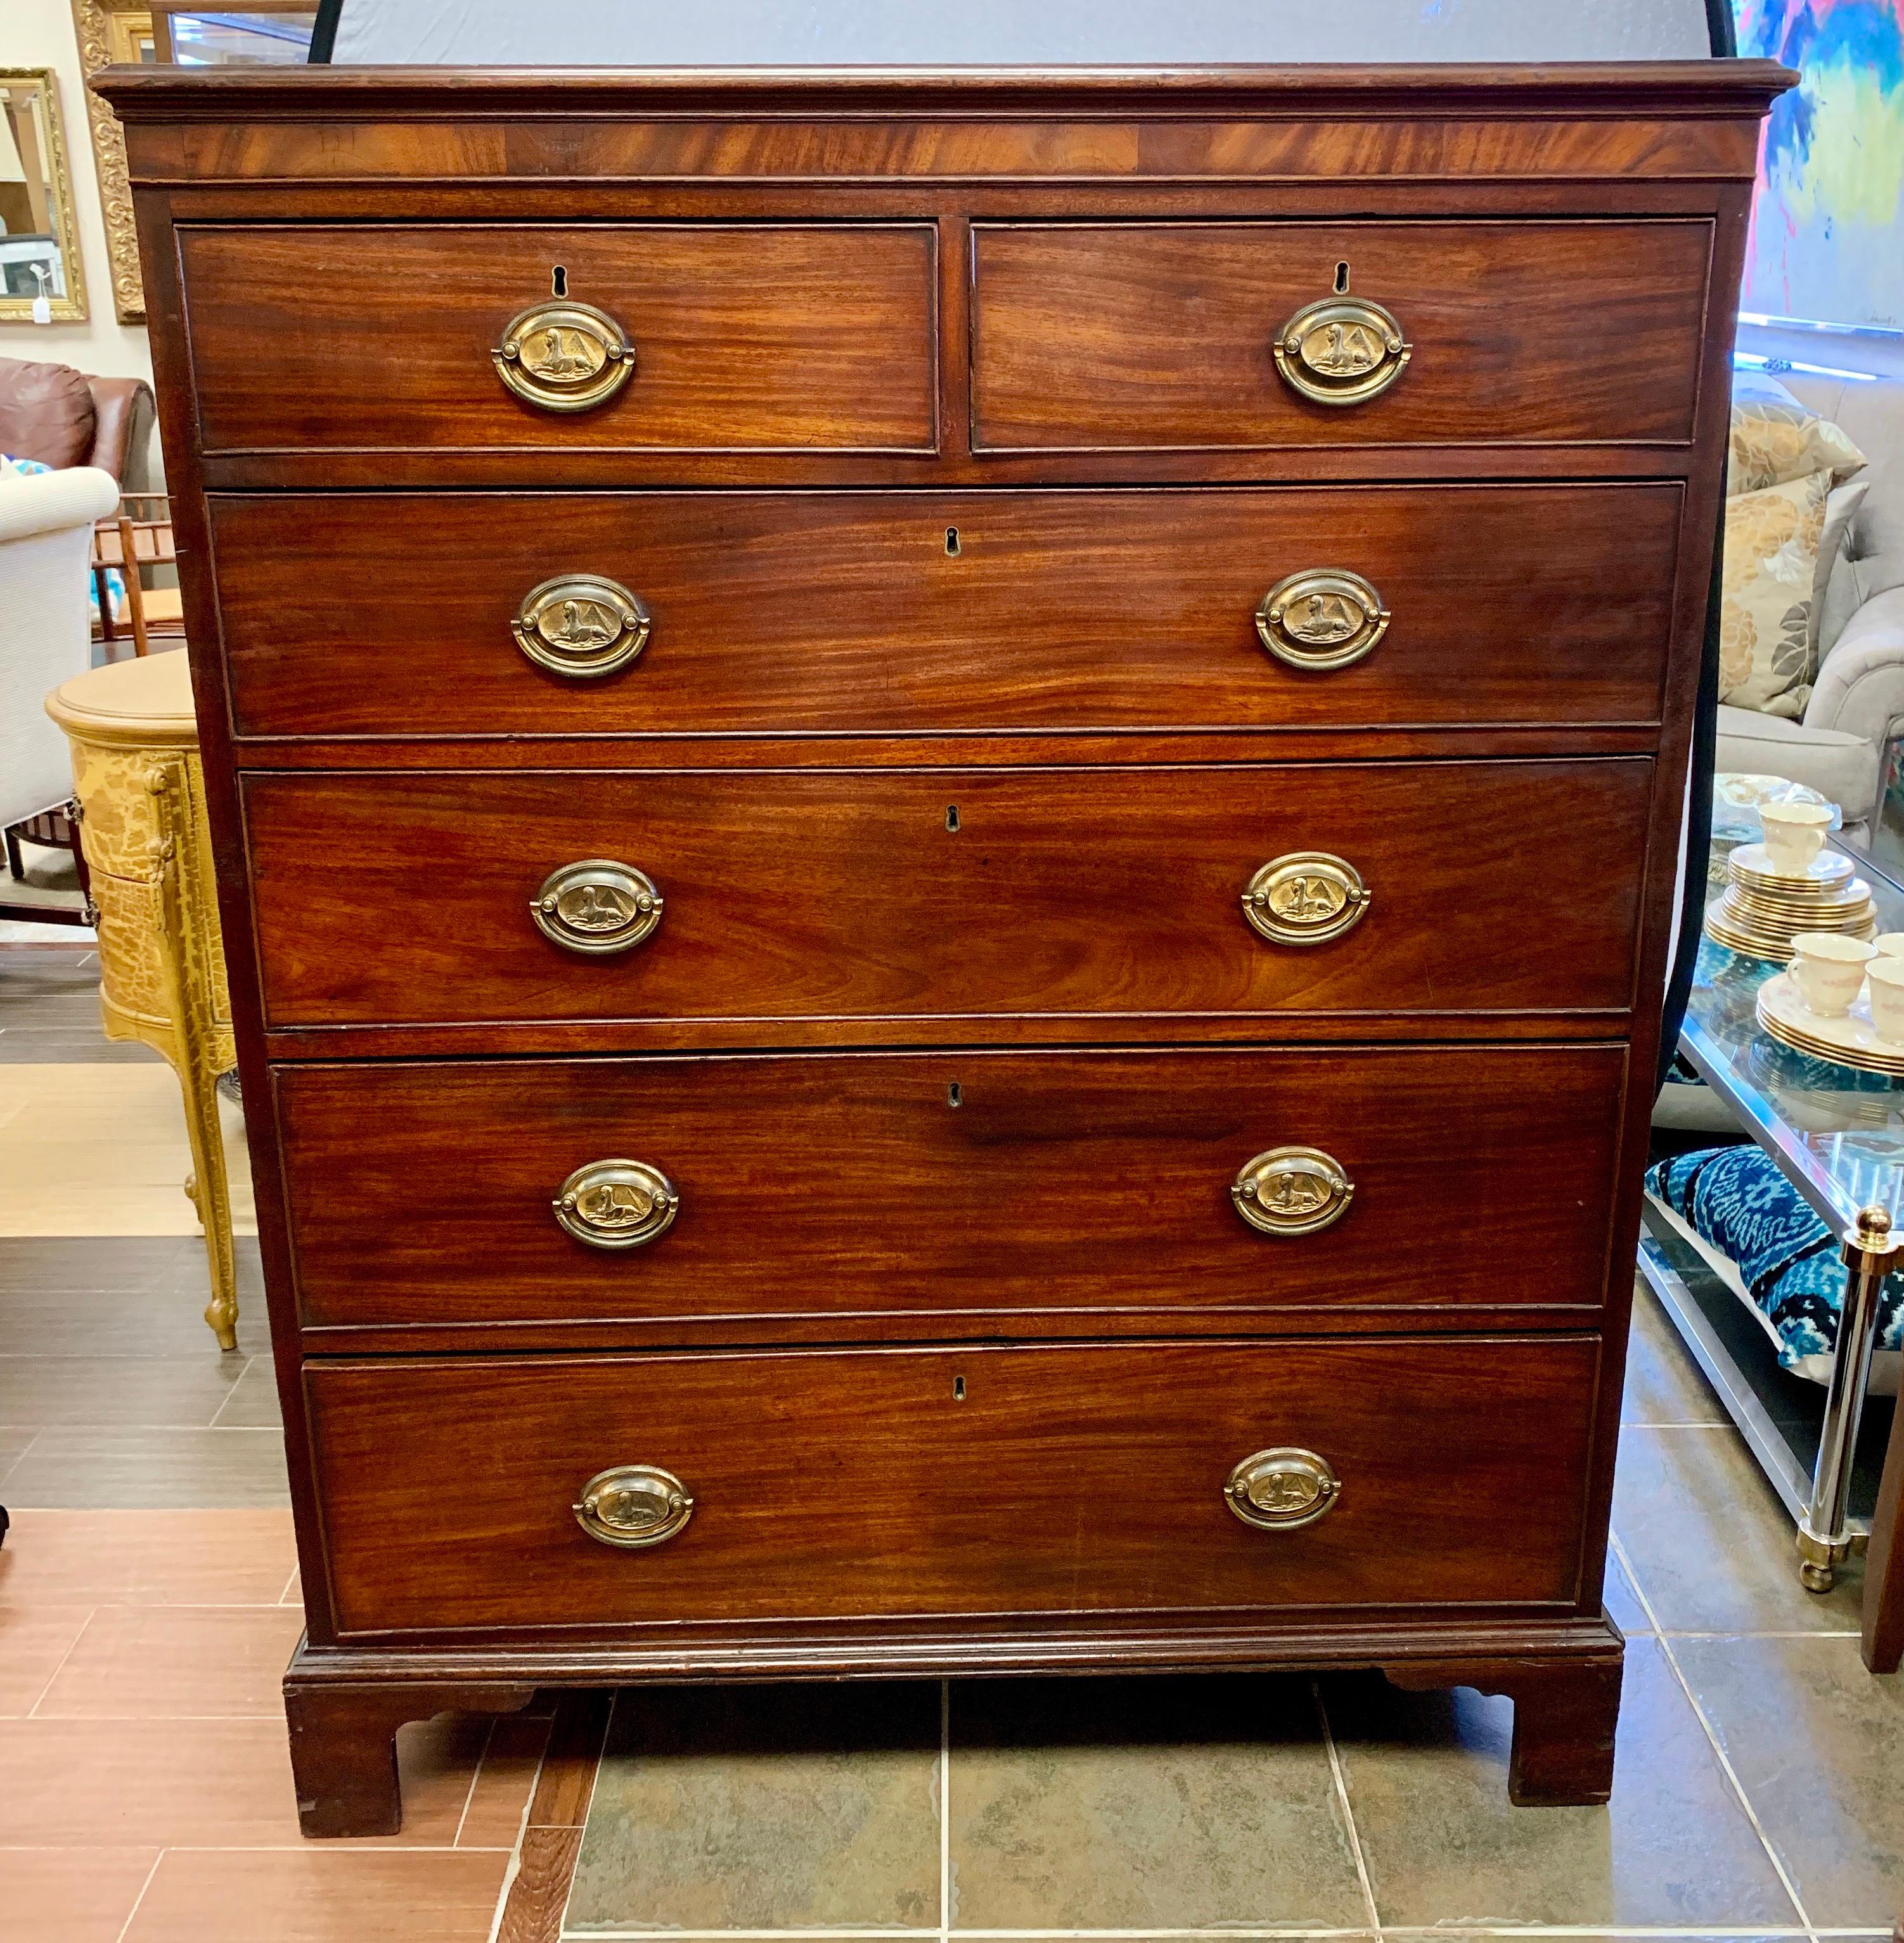 From the 18th century comes this handsome mahogany with two over four drawers with brass oval plate handles with sphinxes. It has mounded edges and stands on bracket feet. The wood has a lovely aged patina only acquired through its age and use.